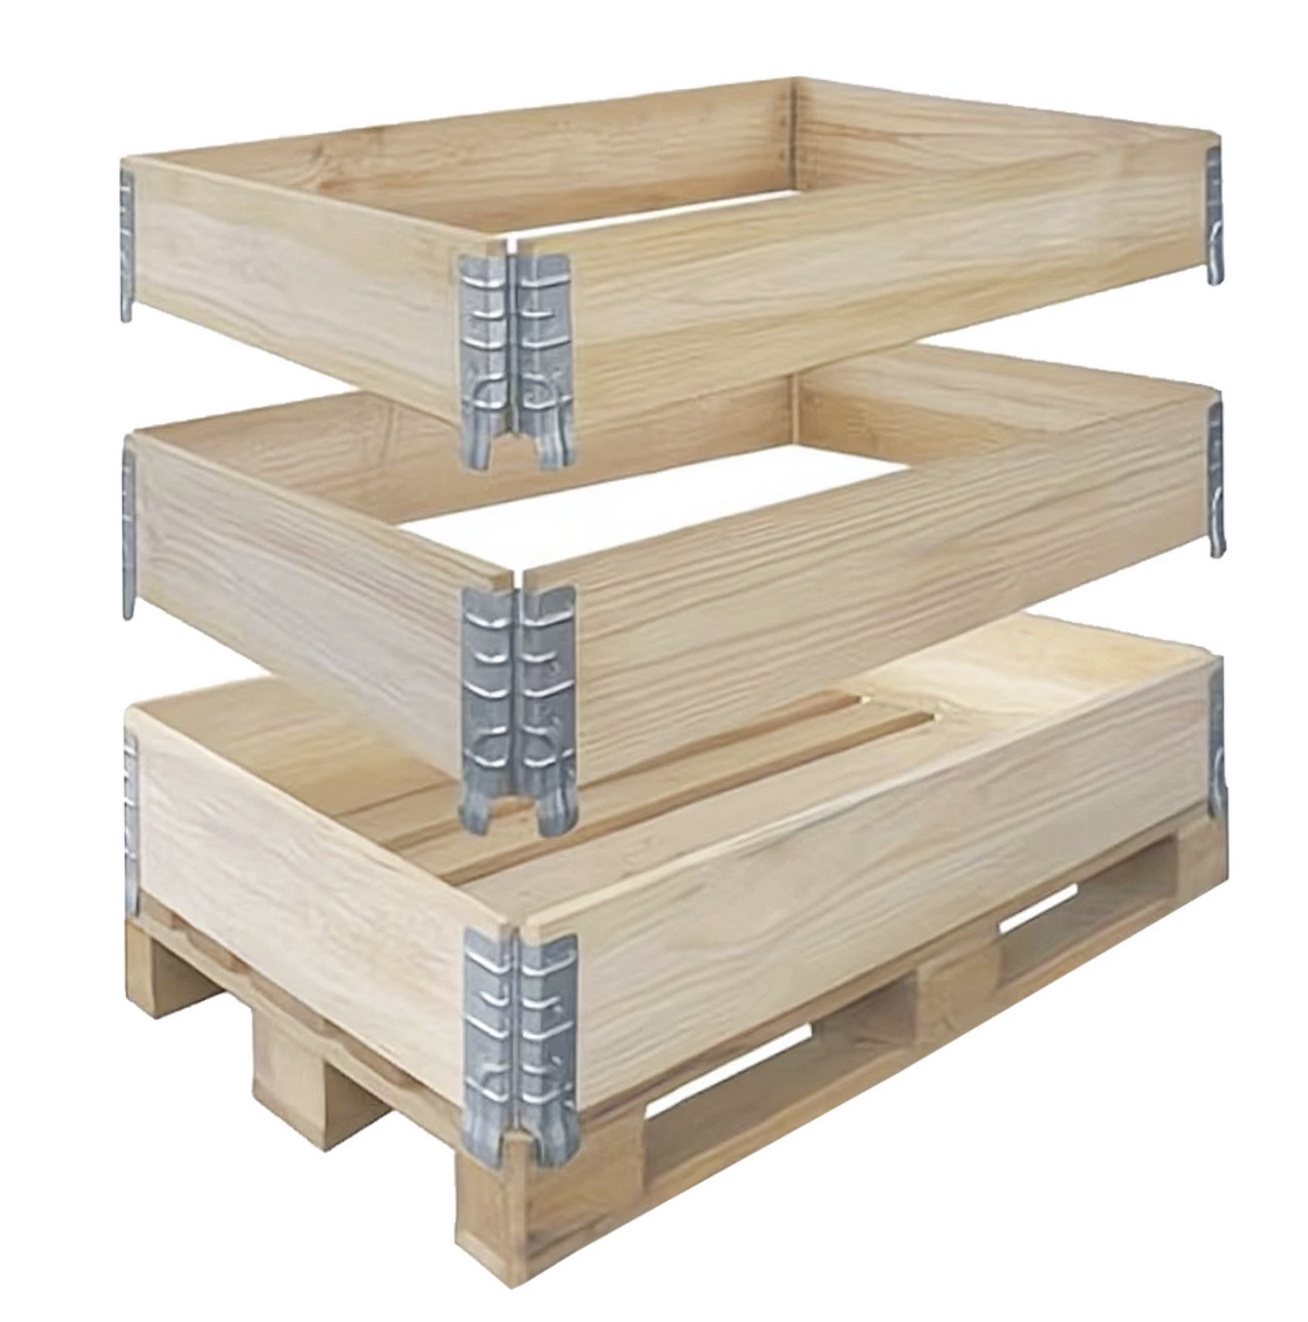 pallet collars in canada sales service parts rentals for raised garden beds modular storage shipping receiving warehouse events 2